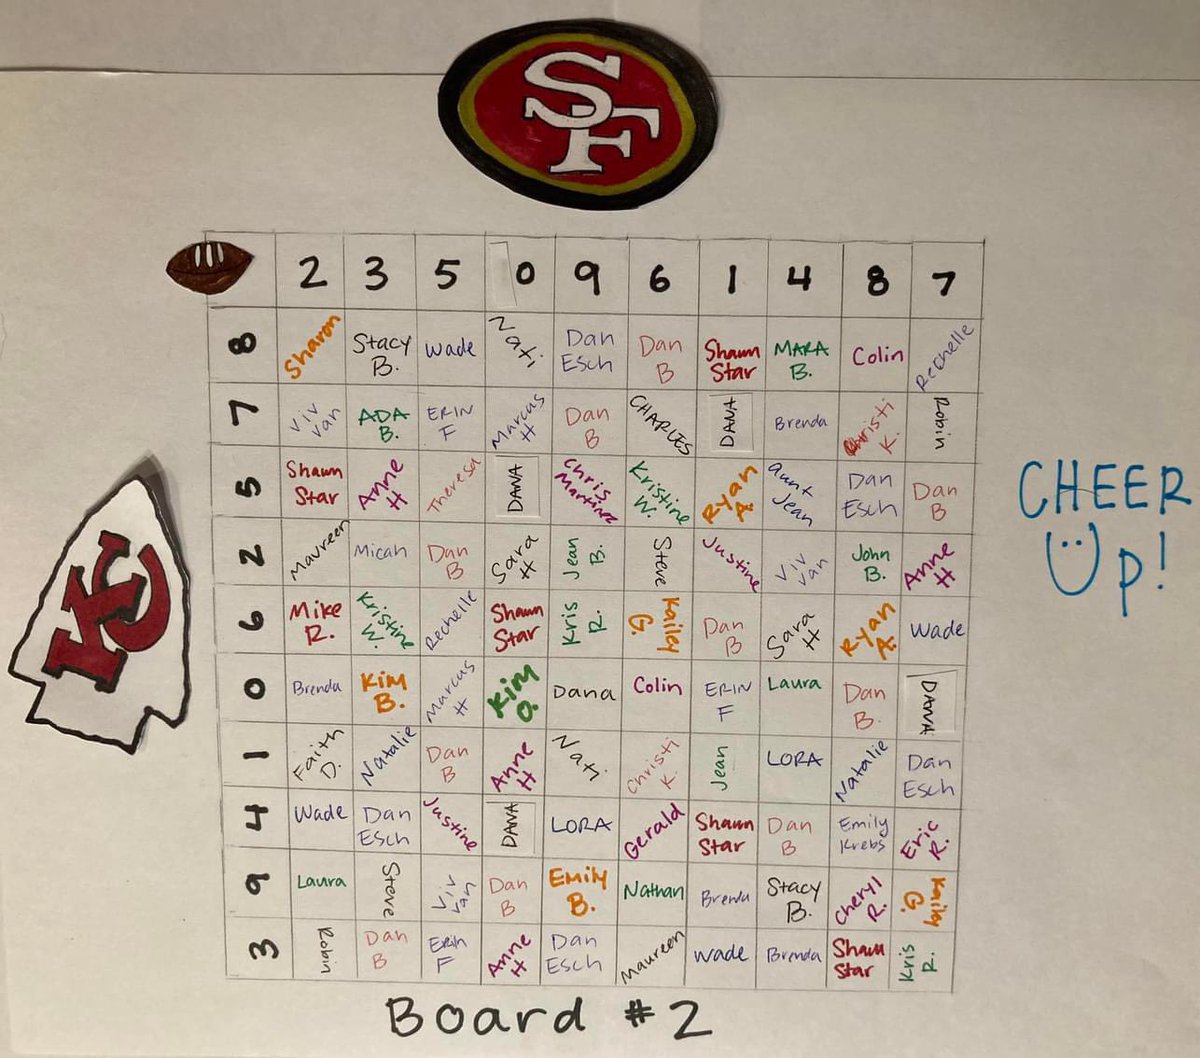 Here’re the boards for Cheer Up!'s Super Bowl Squares! Thanks to everybody who bought a square. You’re helping fund Random Acts of Cheer! Good luck! #squares #SuperBowl #SuperBowl2024 #SuperBowlLVII #CheerUp